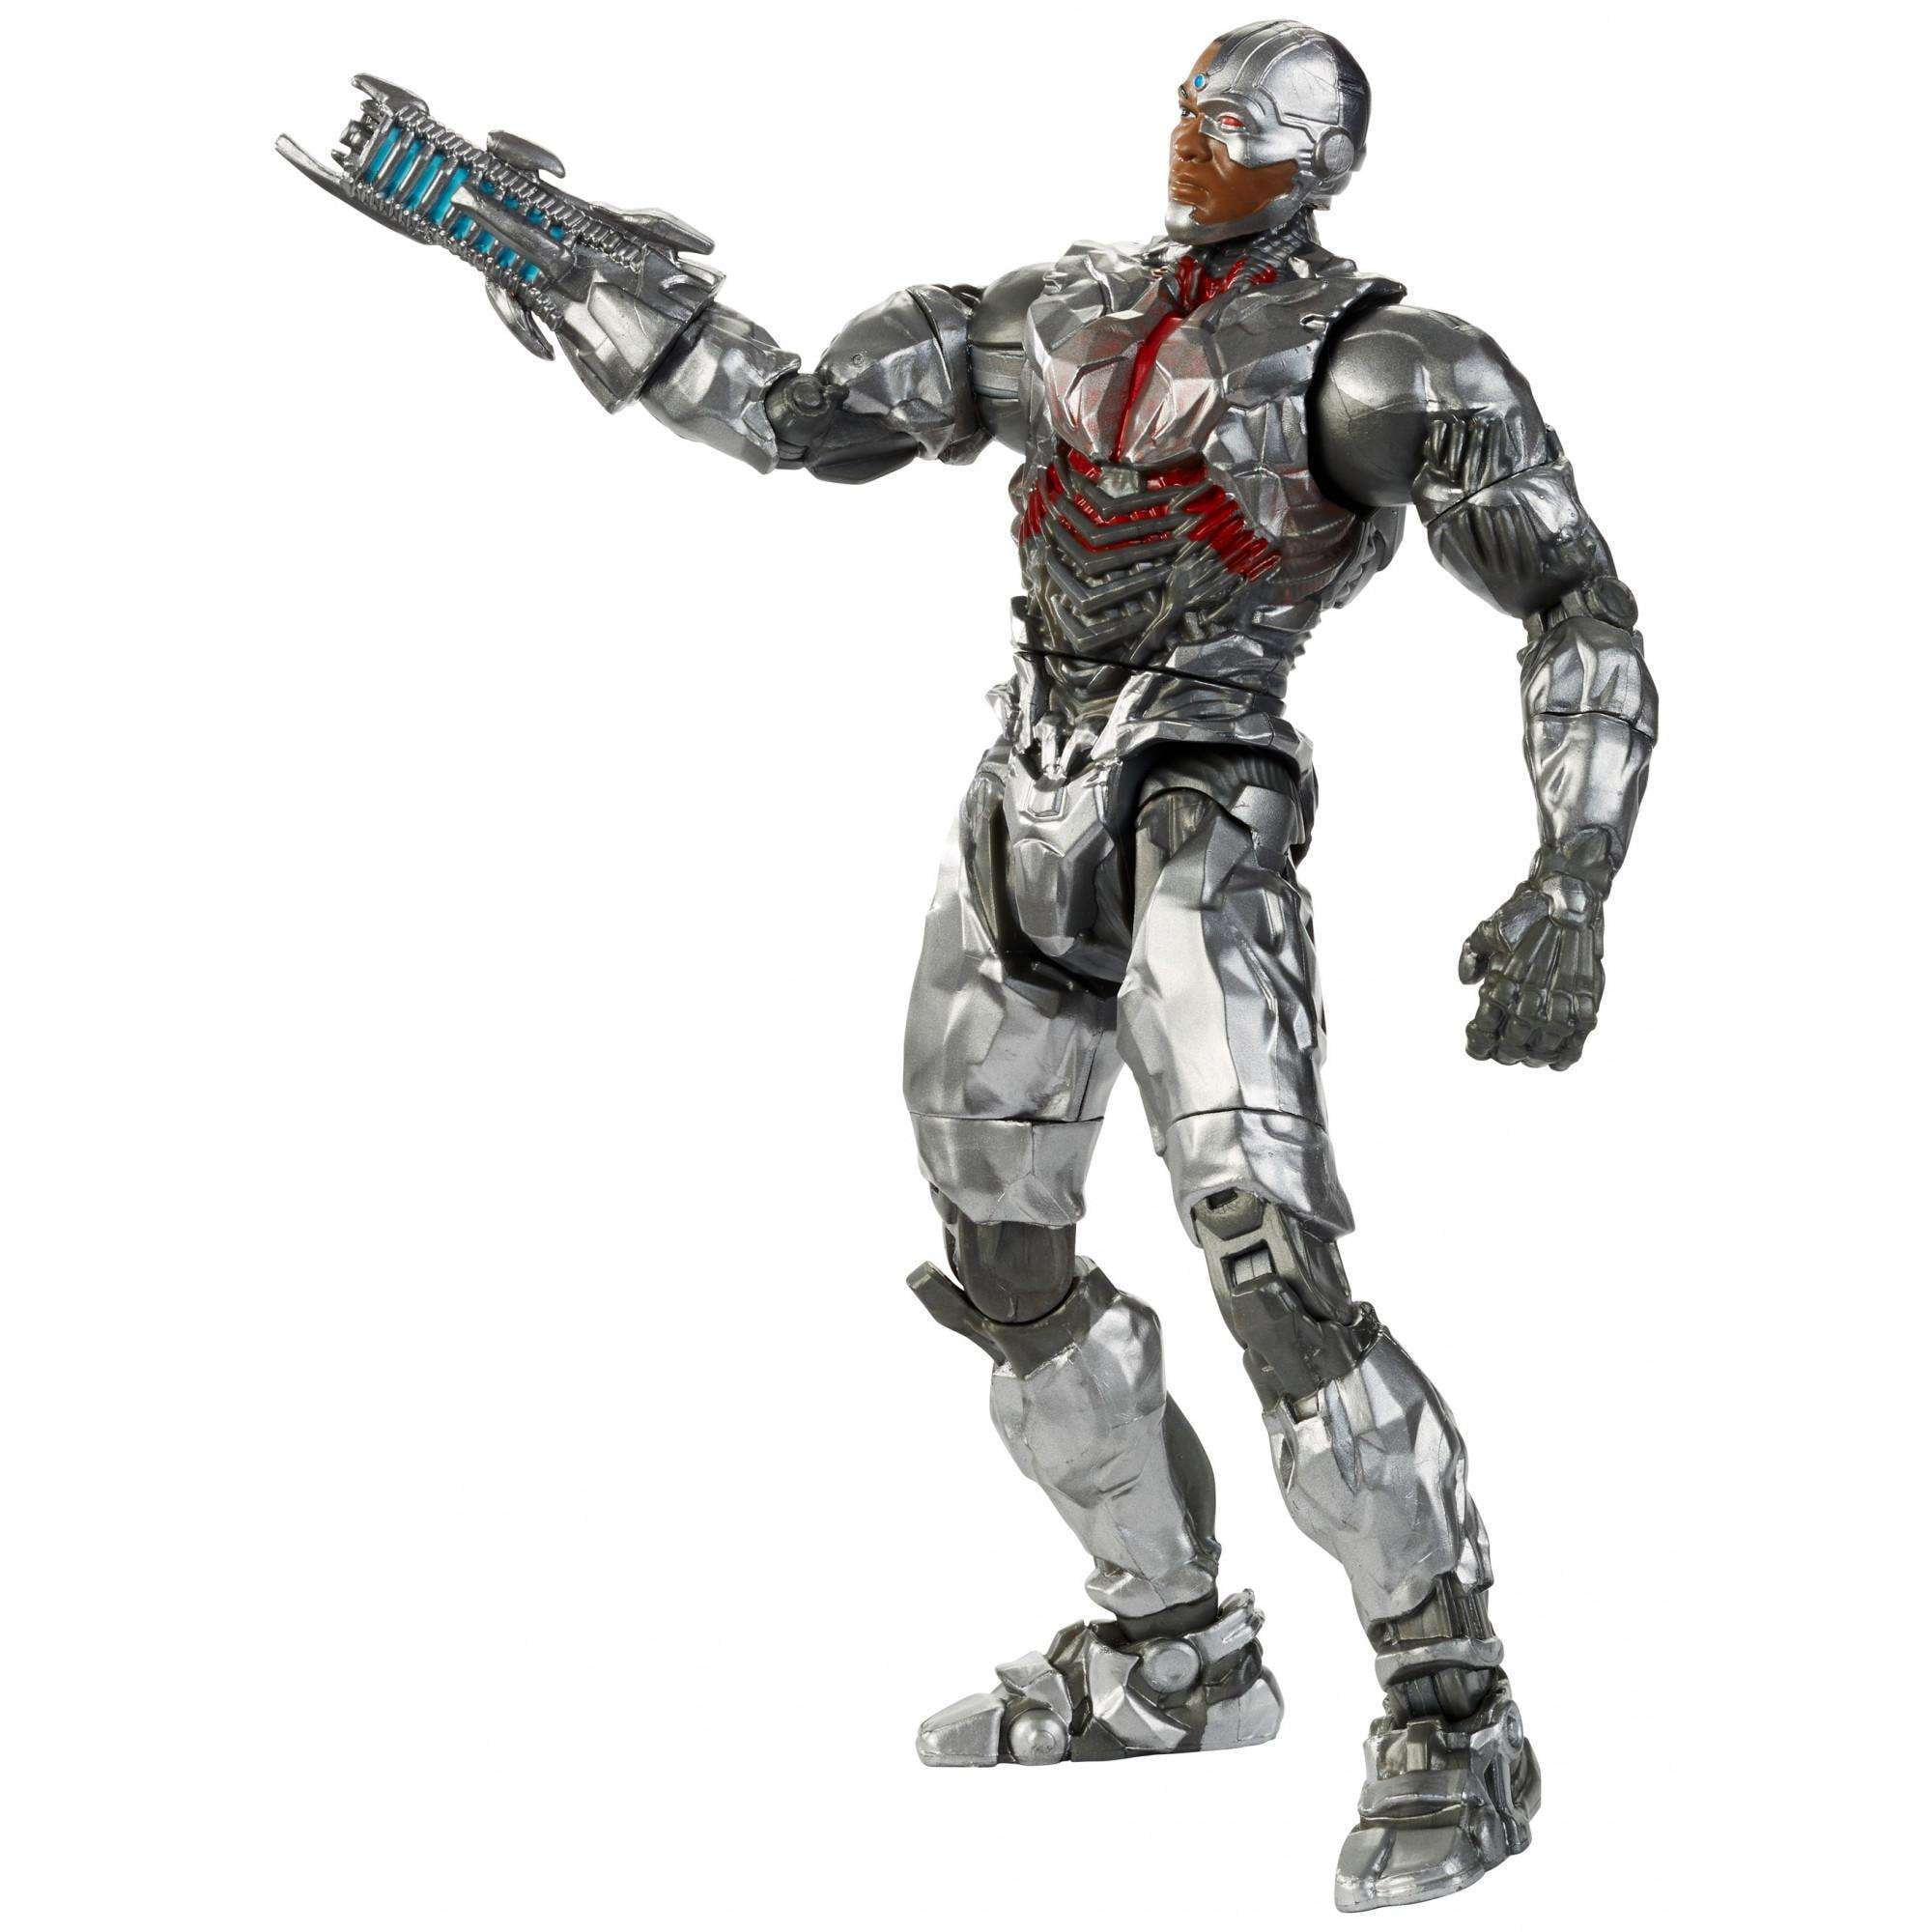 DC Comics Multiverse Justice League Movie Cyborg Action Figure 6 in B1 for sale online